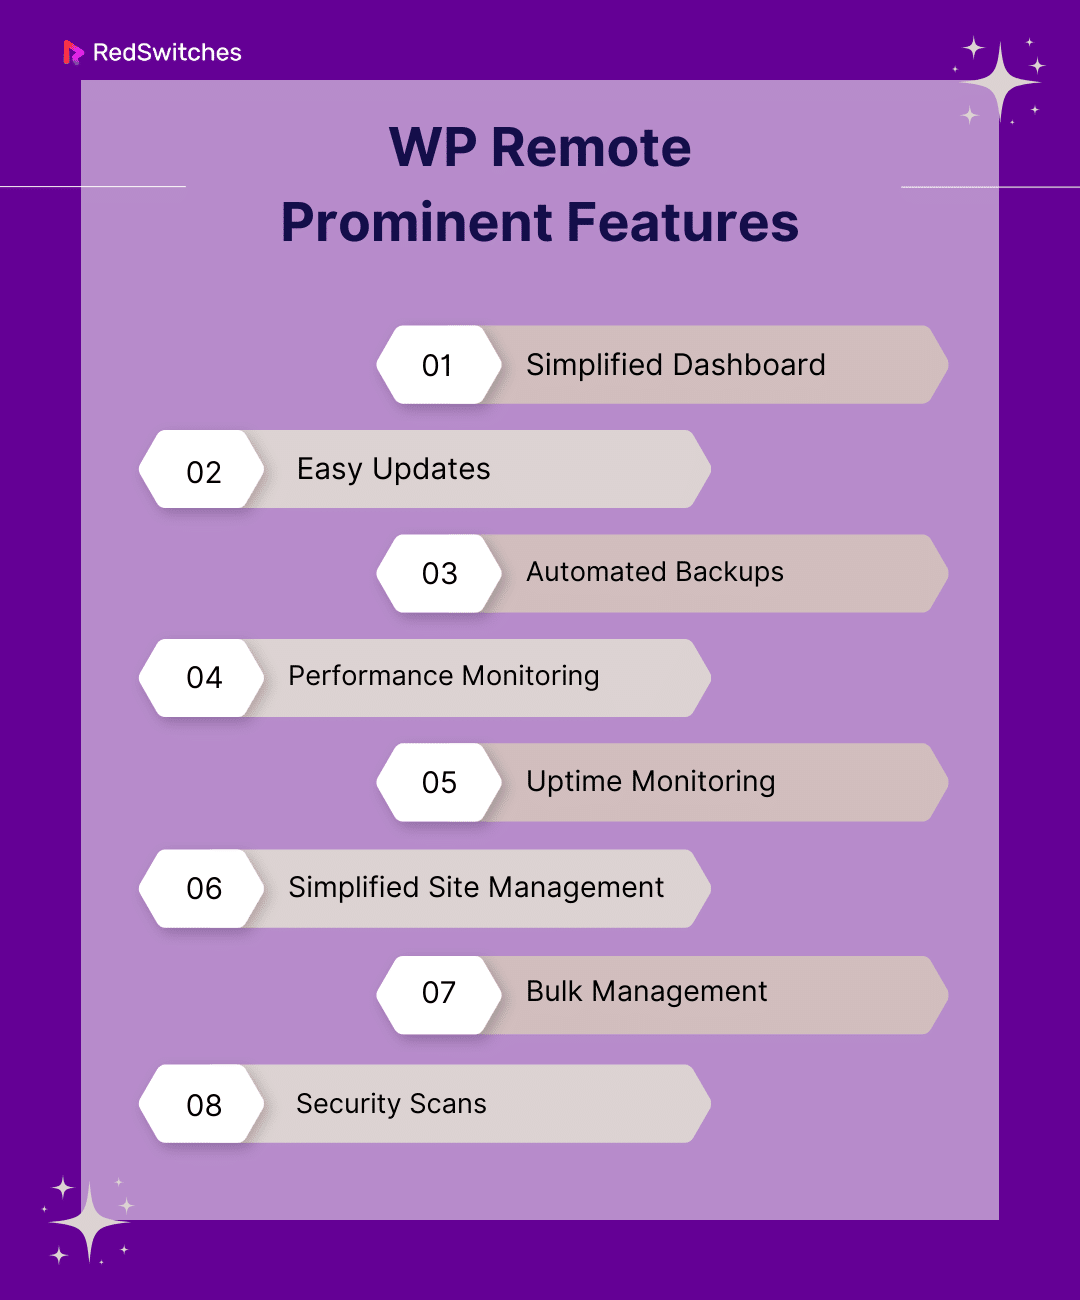 WP Remote Prominent Features